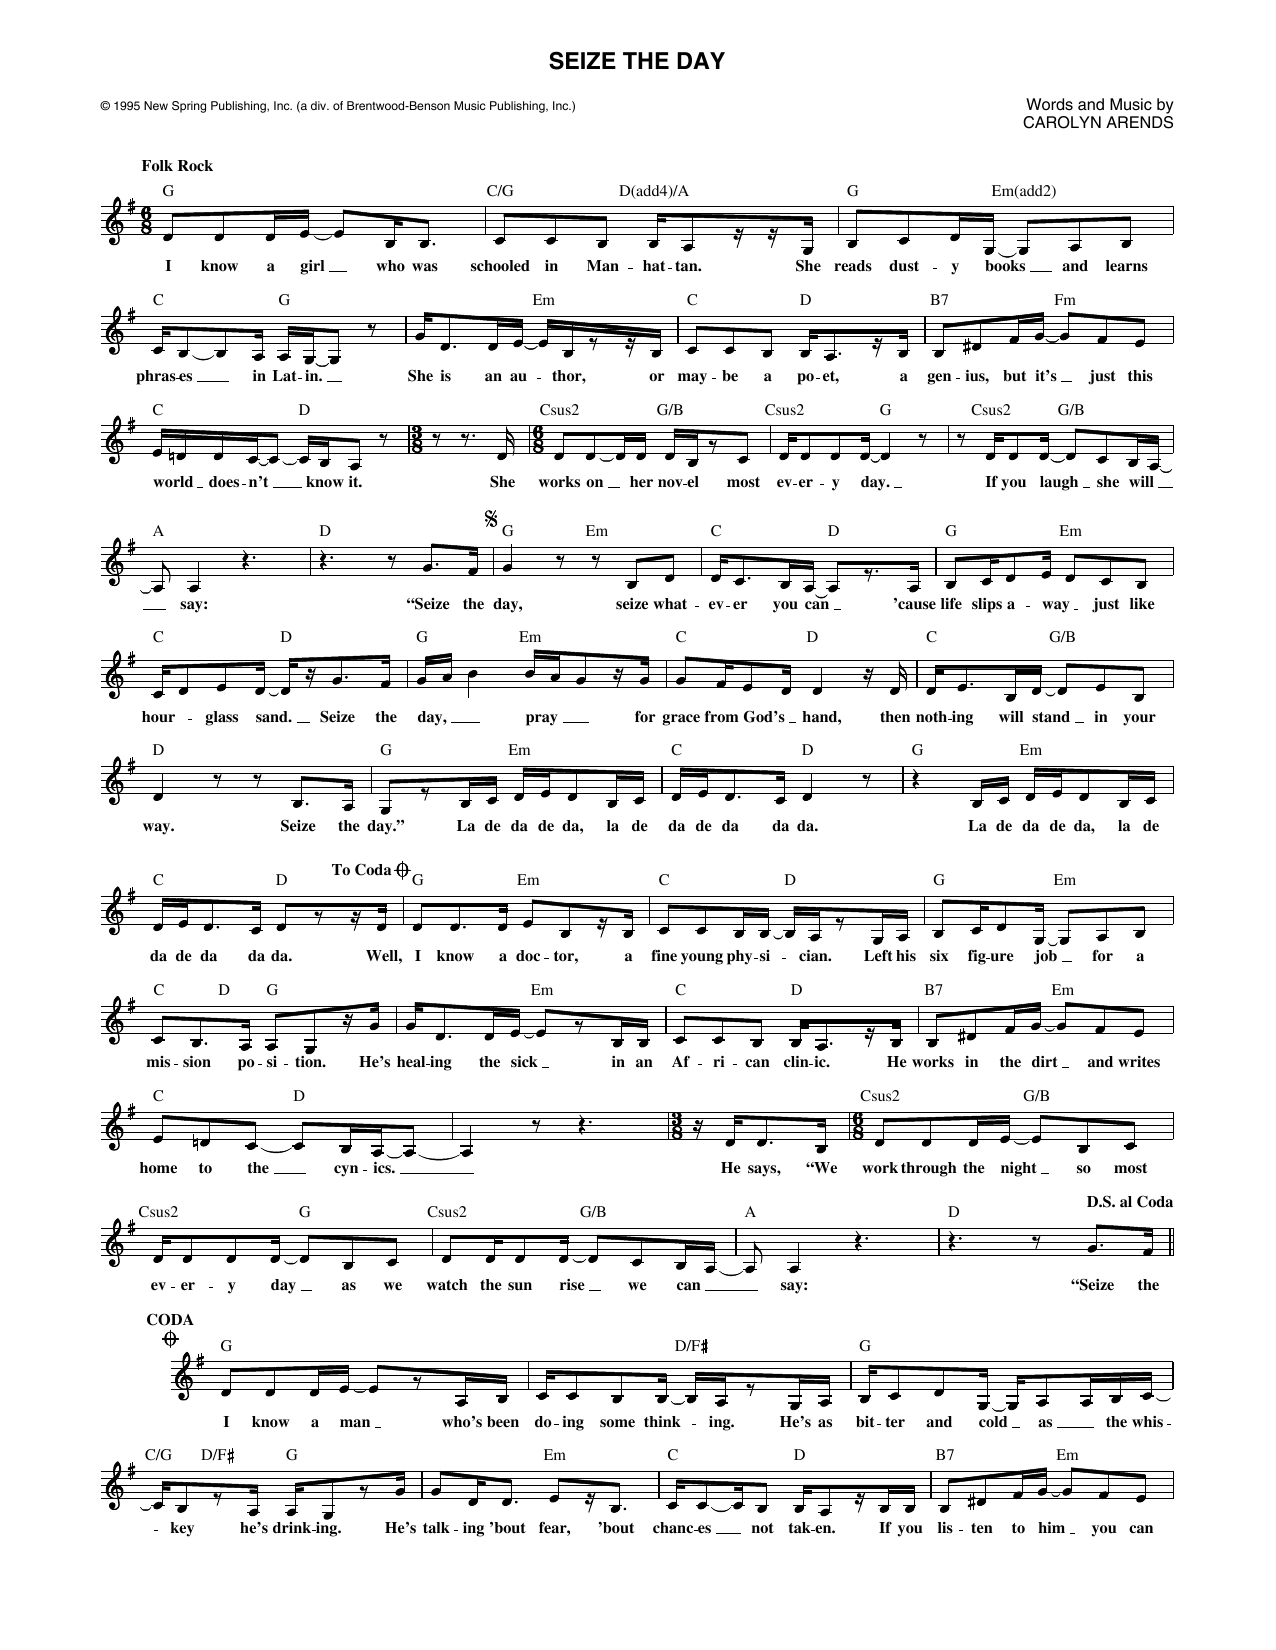 carolyn-arends-seize-the-day-sheet-music-pdf-notes-chords